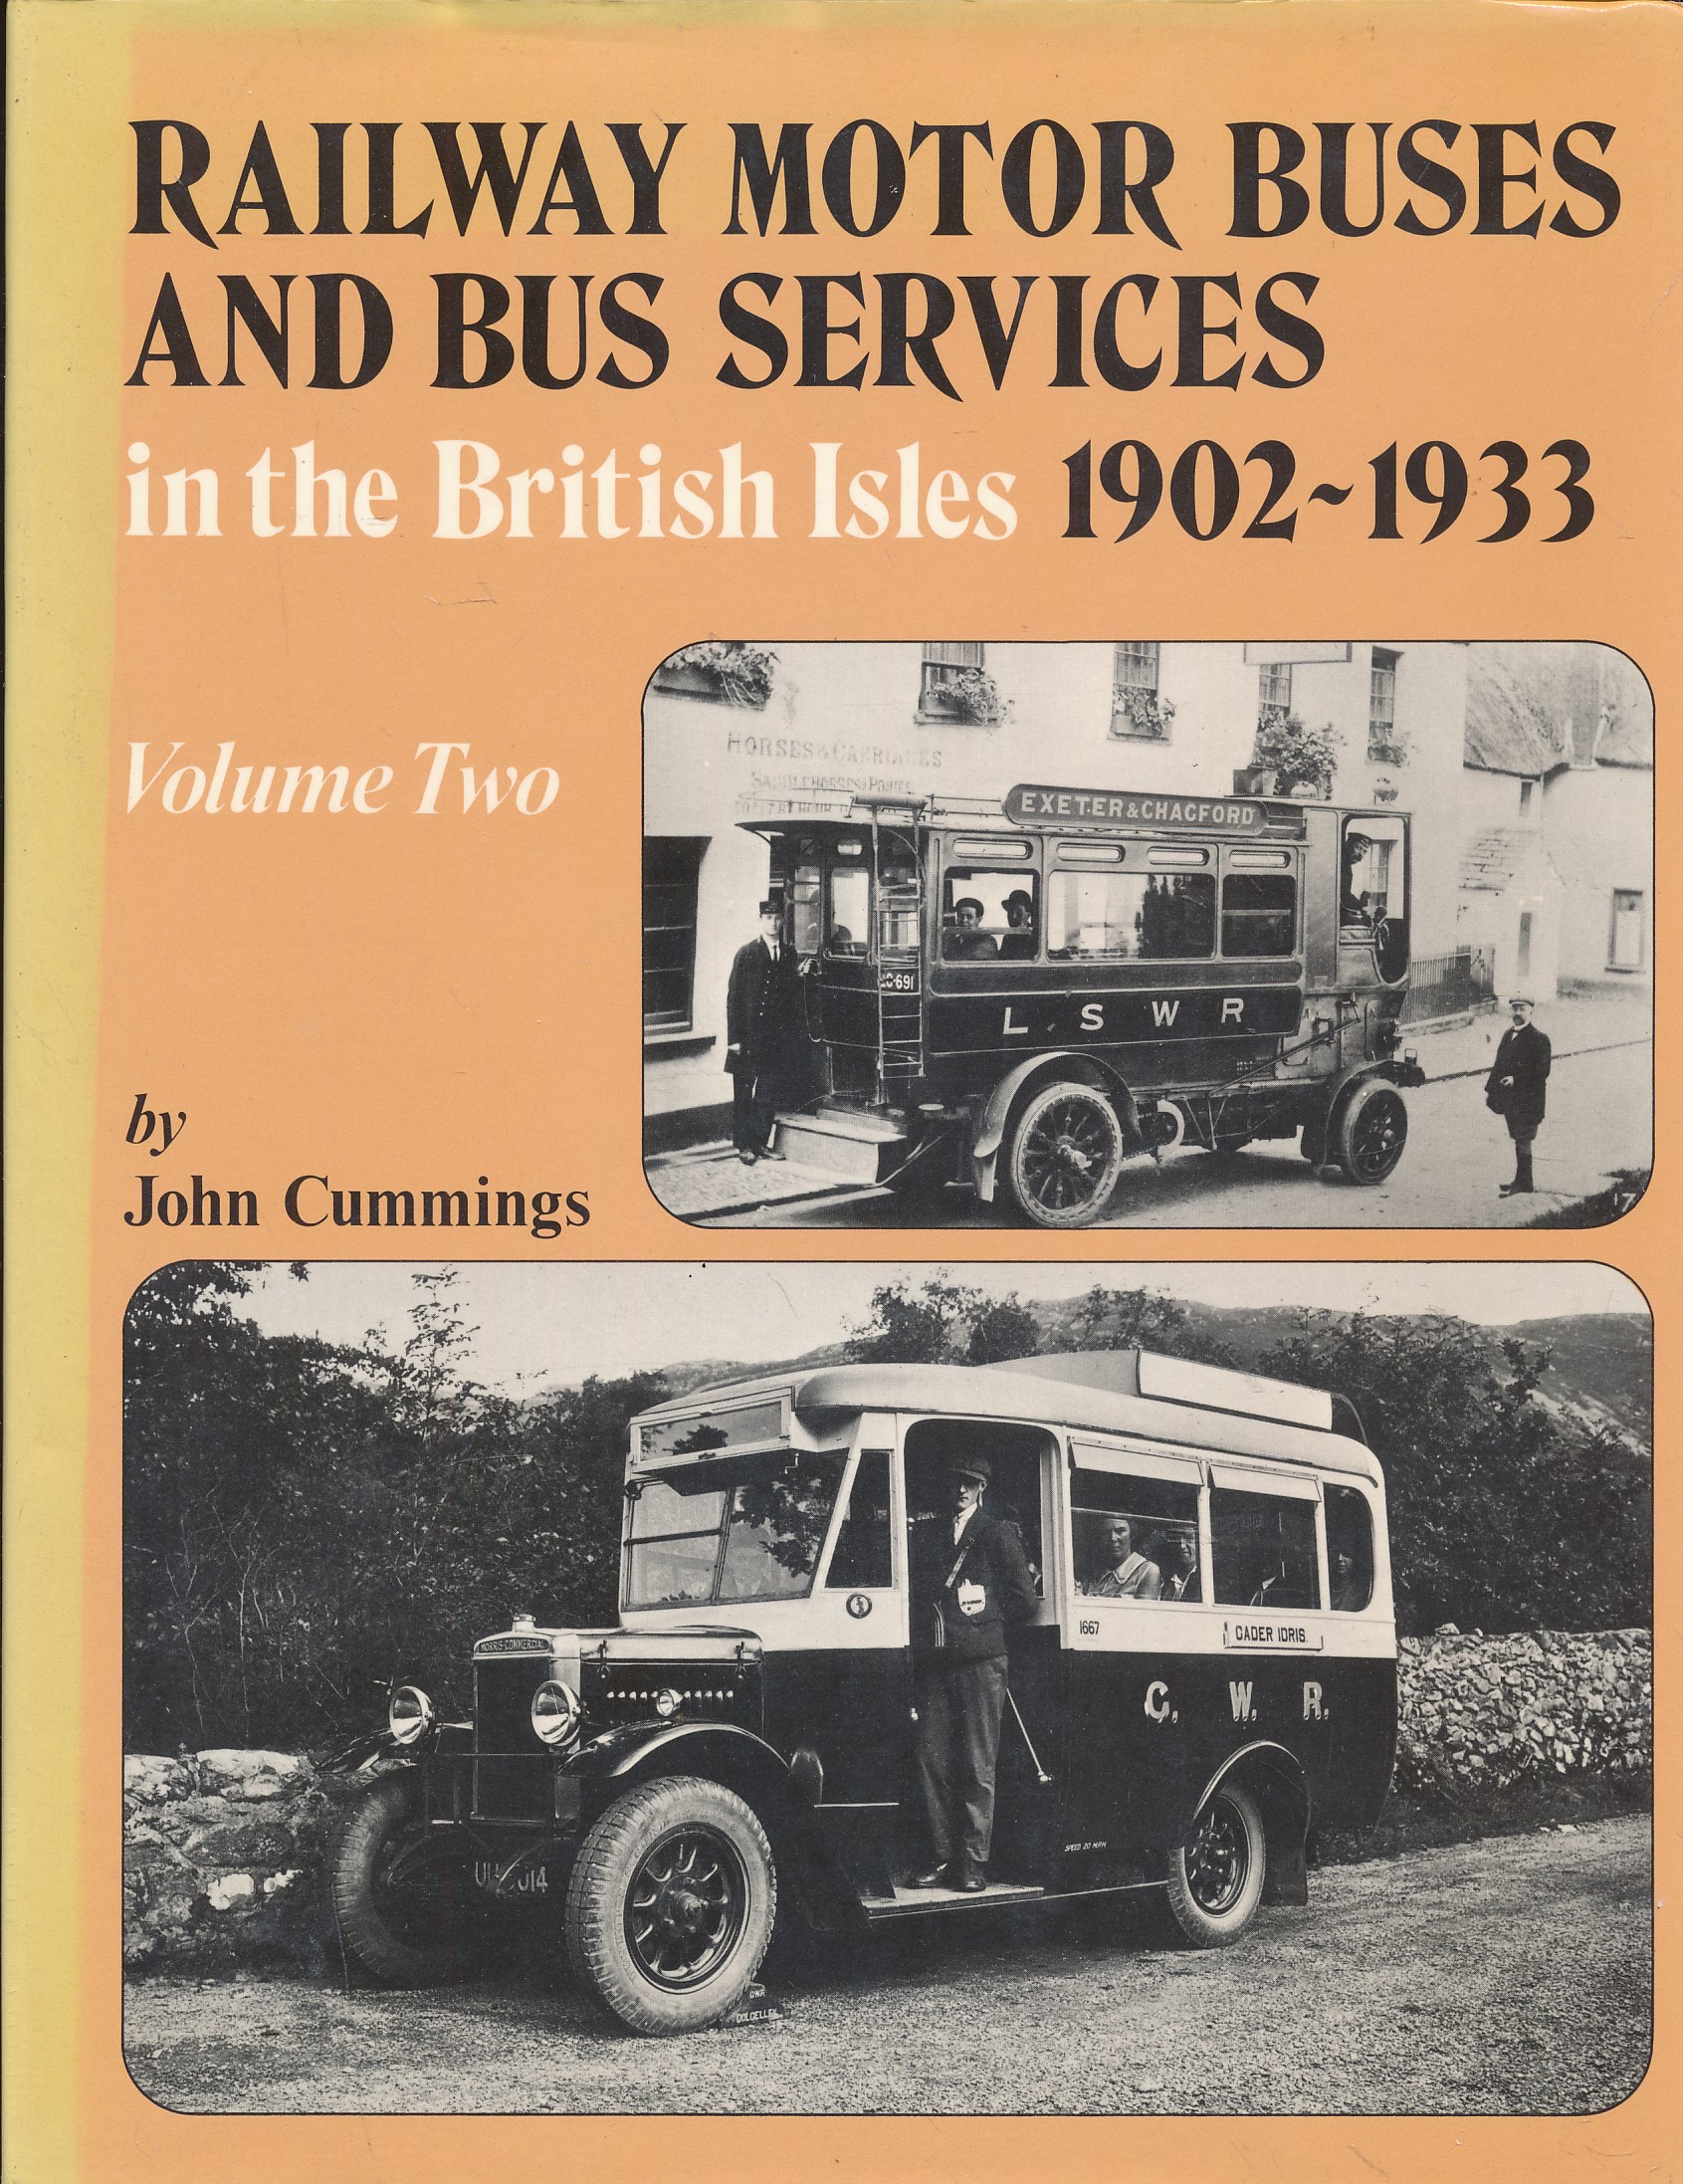 Railway Motor Buses and Bus Services in the British Isles. 1902 - 1923. Volume Two.